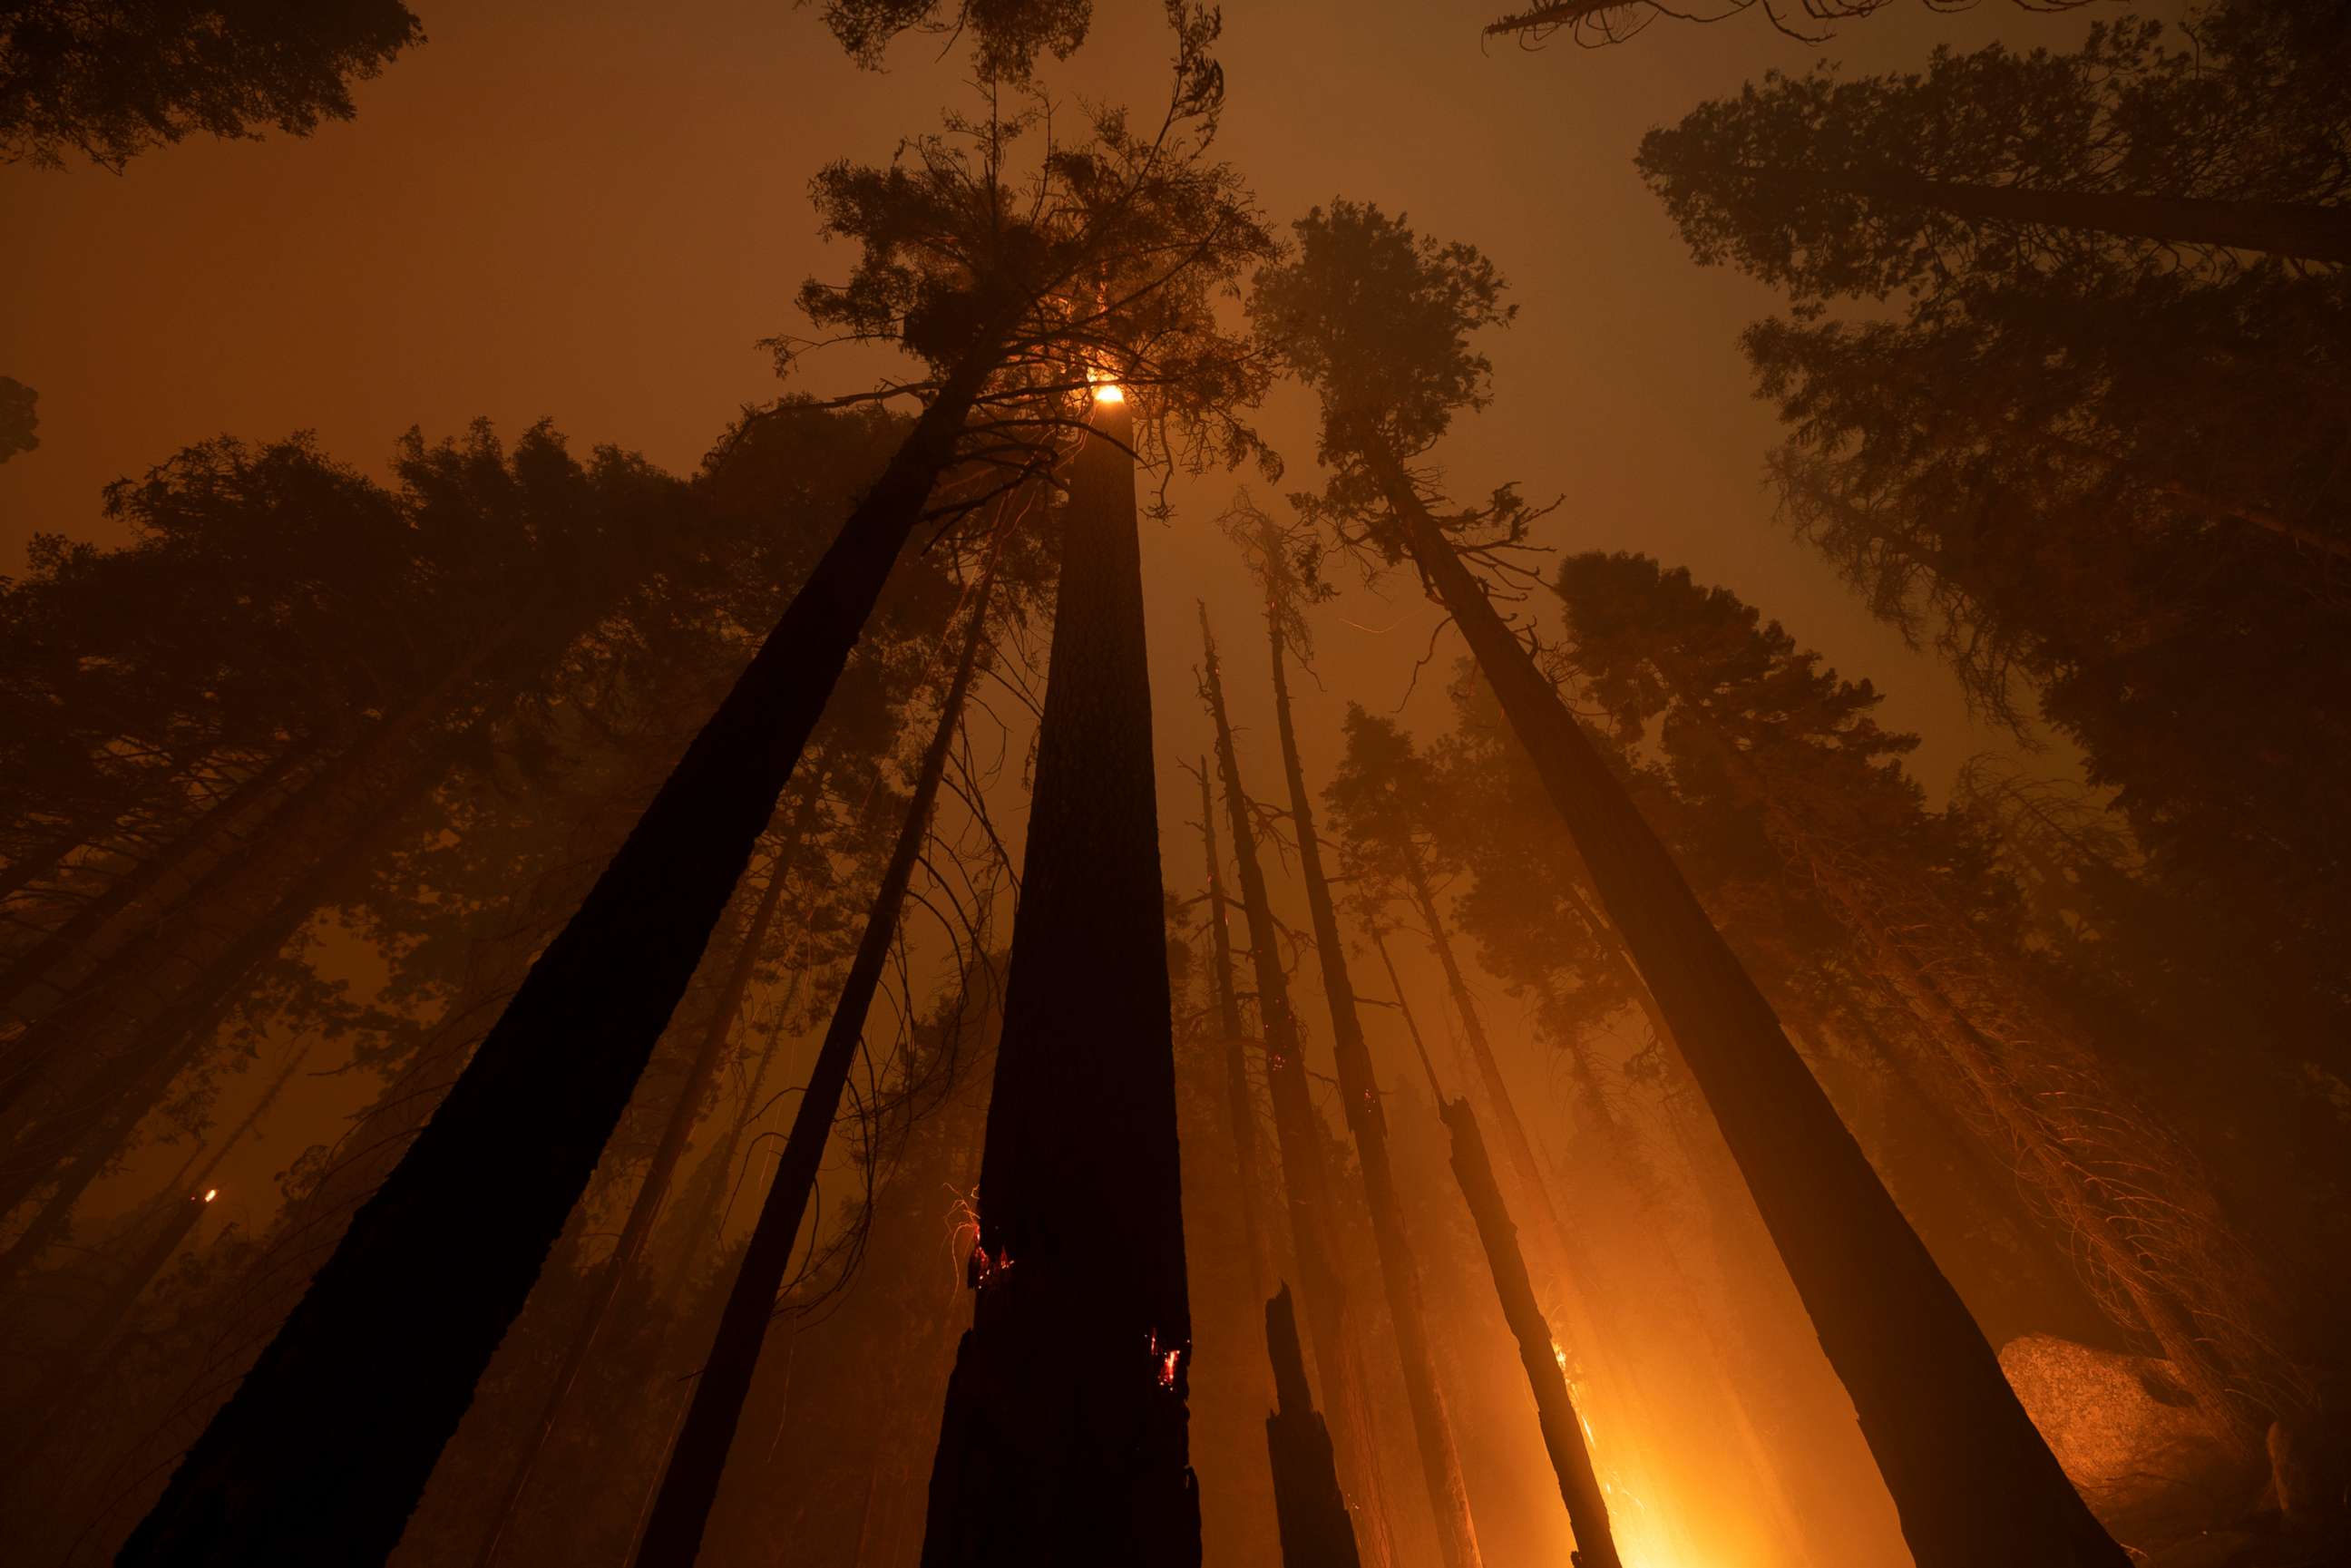 PHOTO: The Windy Fire blazes through the Long Meadow Grove of giant sequoia trees near The Trail of 100 Giants overnight in Sequoia National Park on Sept. 21, 2021, near California Hot Springs, Calif.